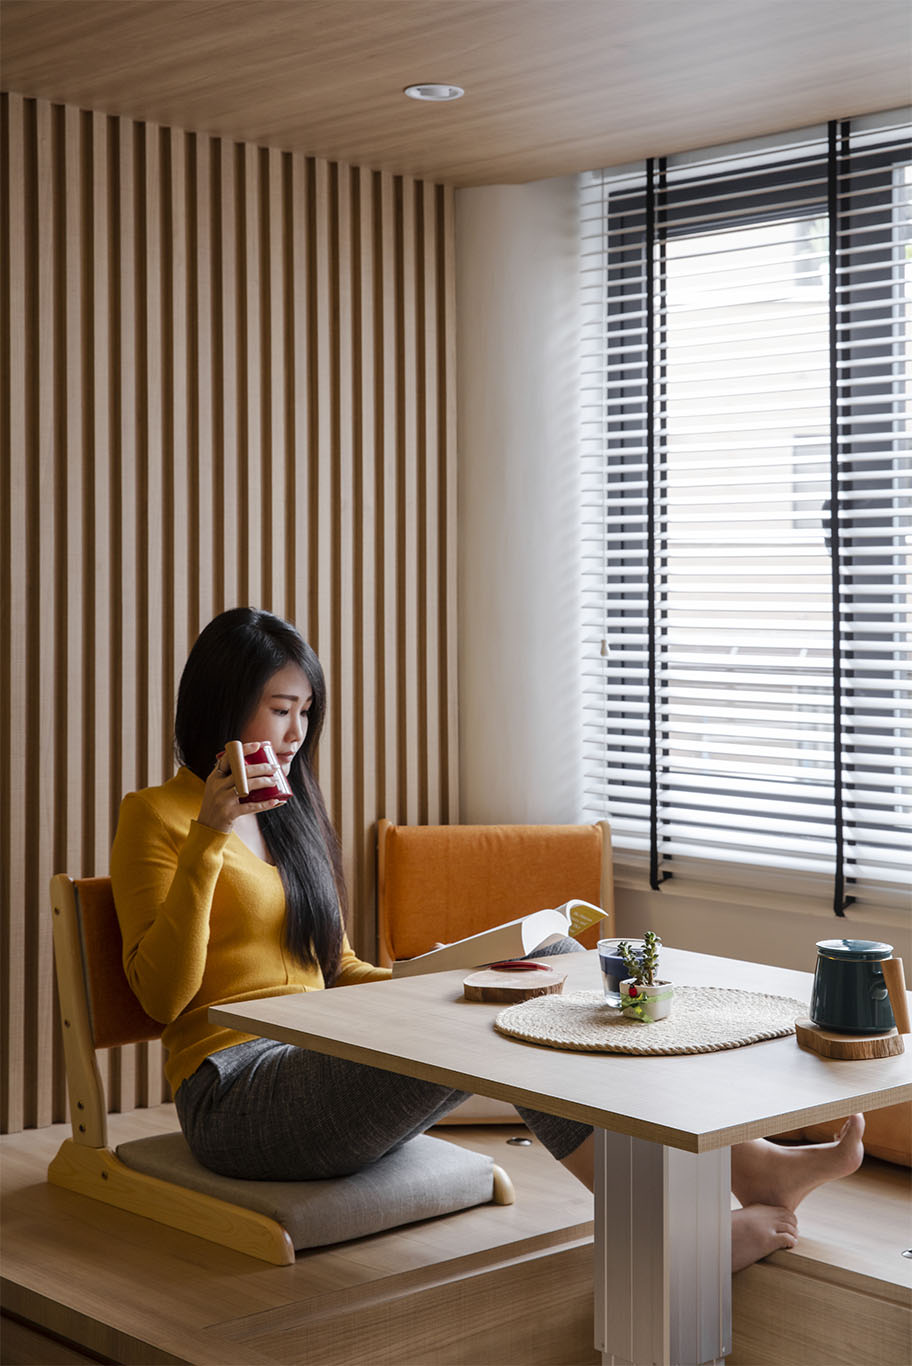 Modern Japanese theme window seat design with wooden strips wall, wooden ceiling with built in minimalist round lamp, minimalist white window blinds, adjustable table, and Japanese chair